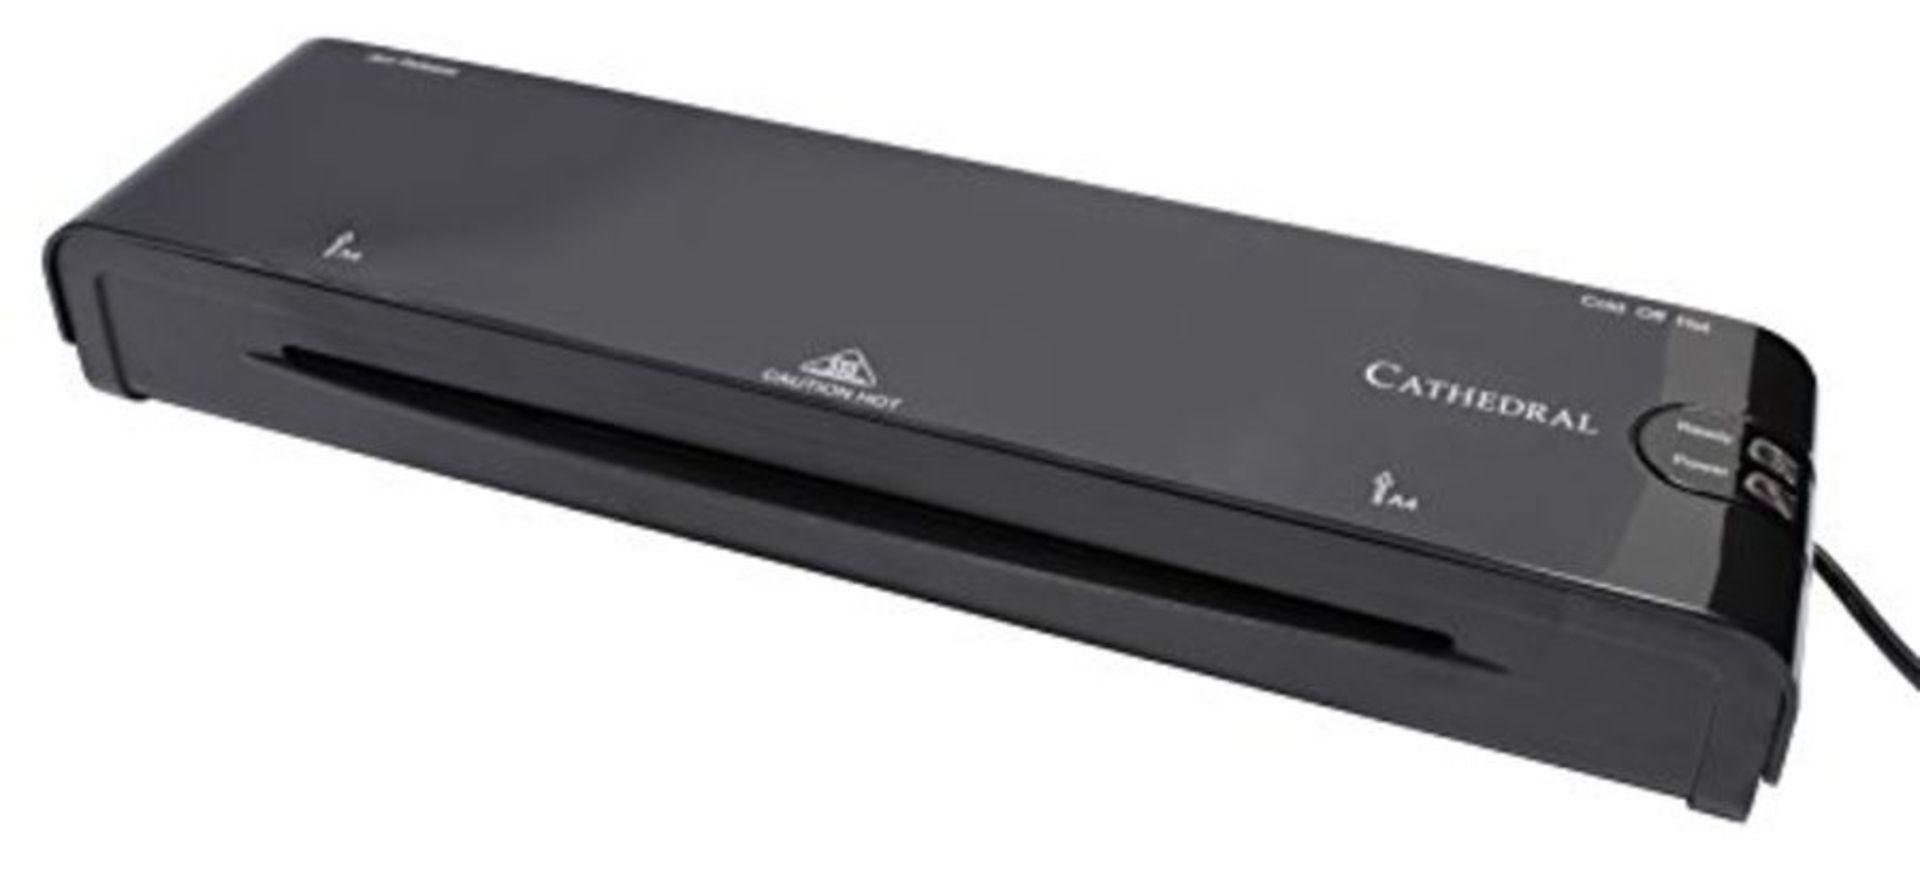 Cathedral LM400 A4 Laminating Machine - Black